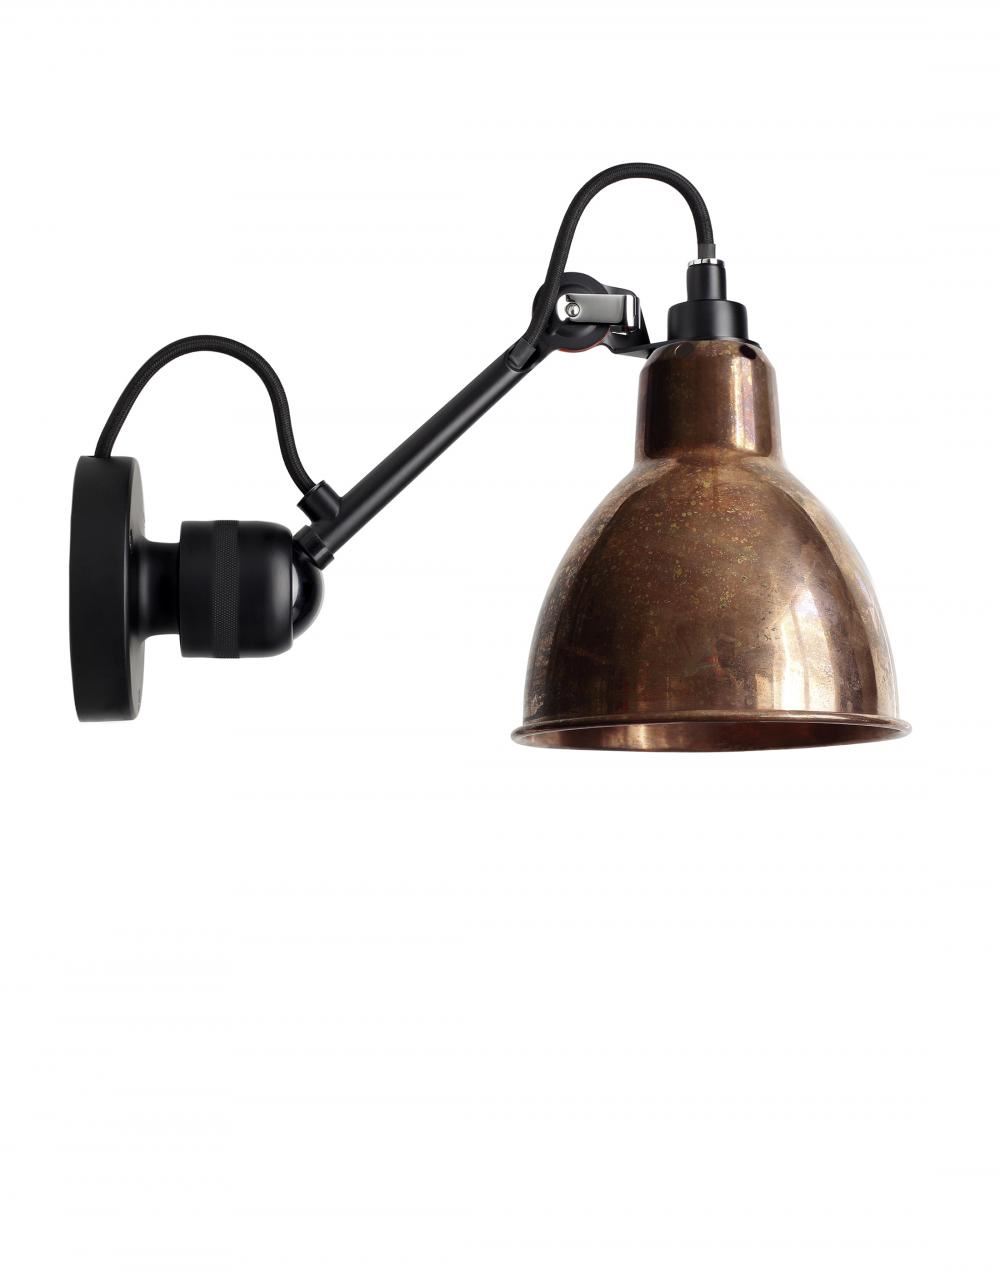 Lampe Gras 304 Small Wall Light Black Arm Raw Copper Shade With White Interior Round Hardwired